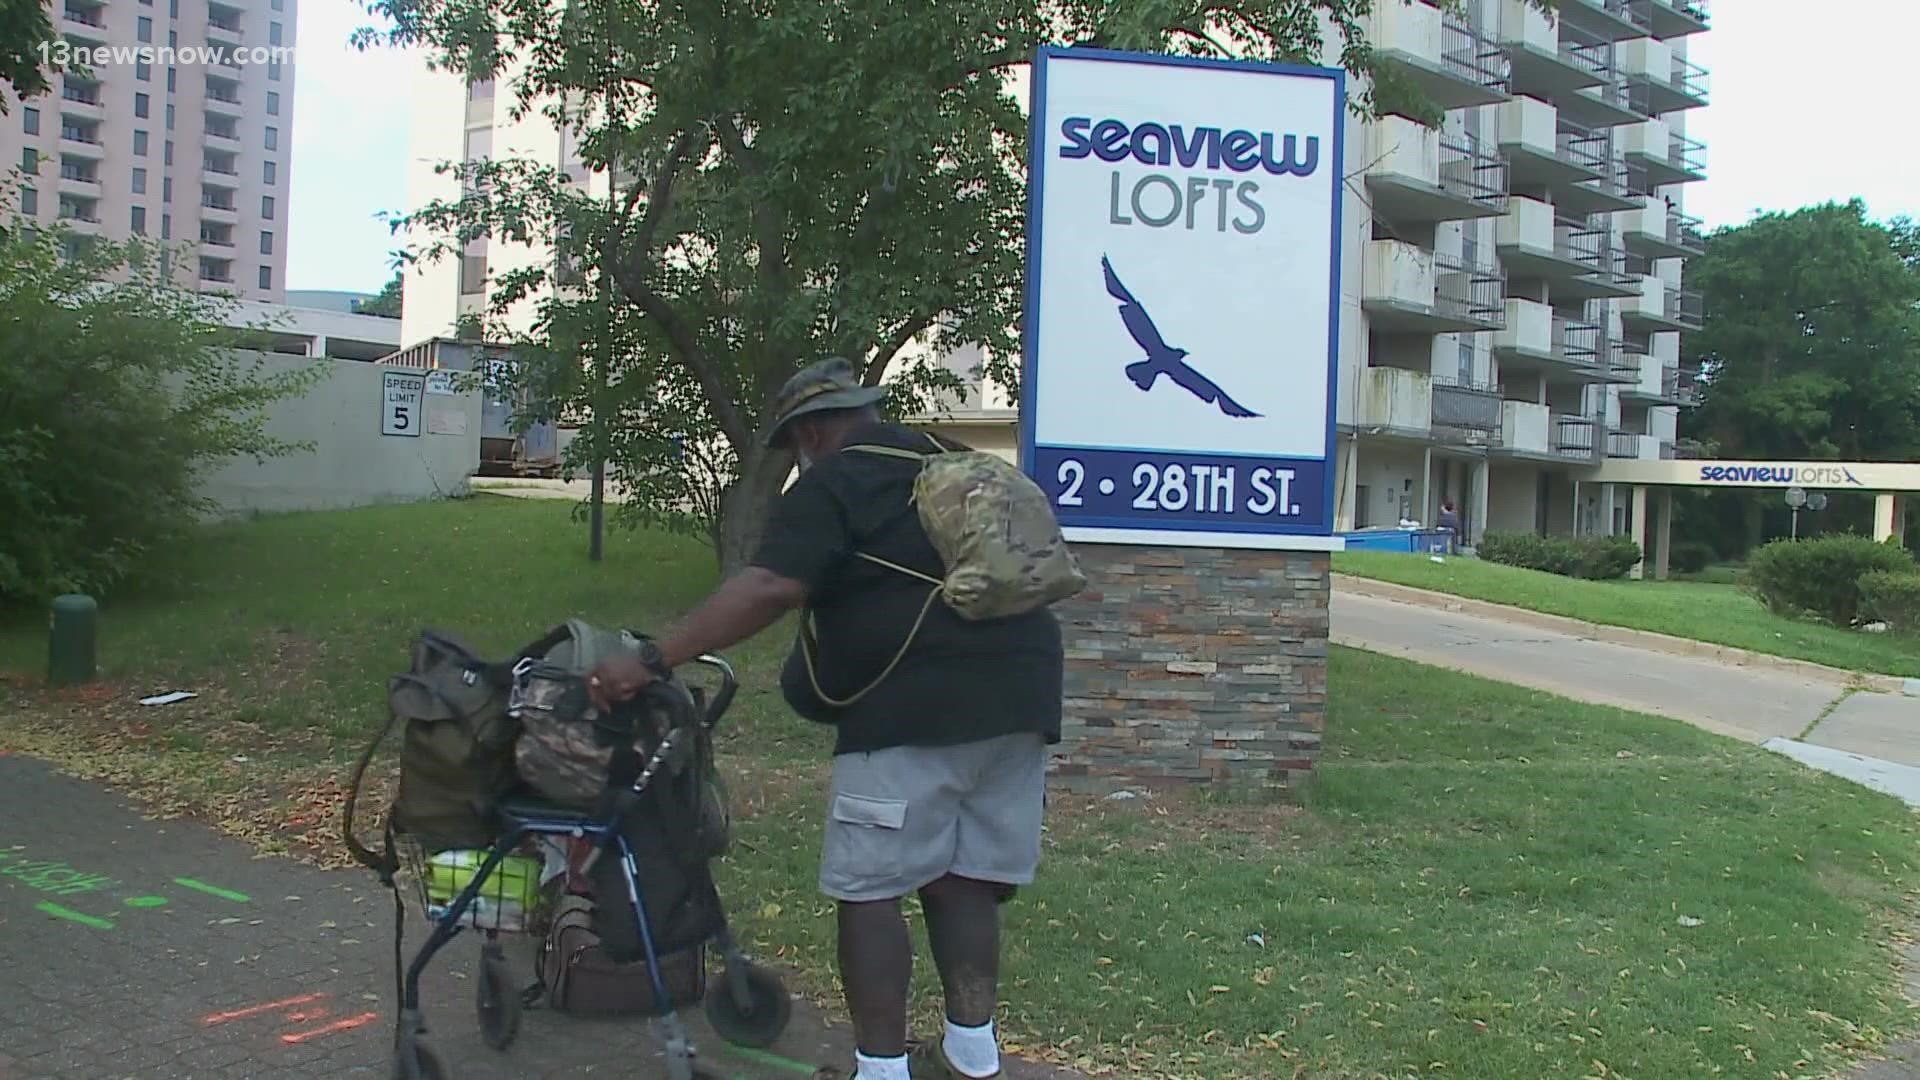 A court order has hundreds of residents in Newport News looking for a temporary place to stay.